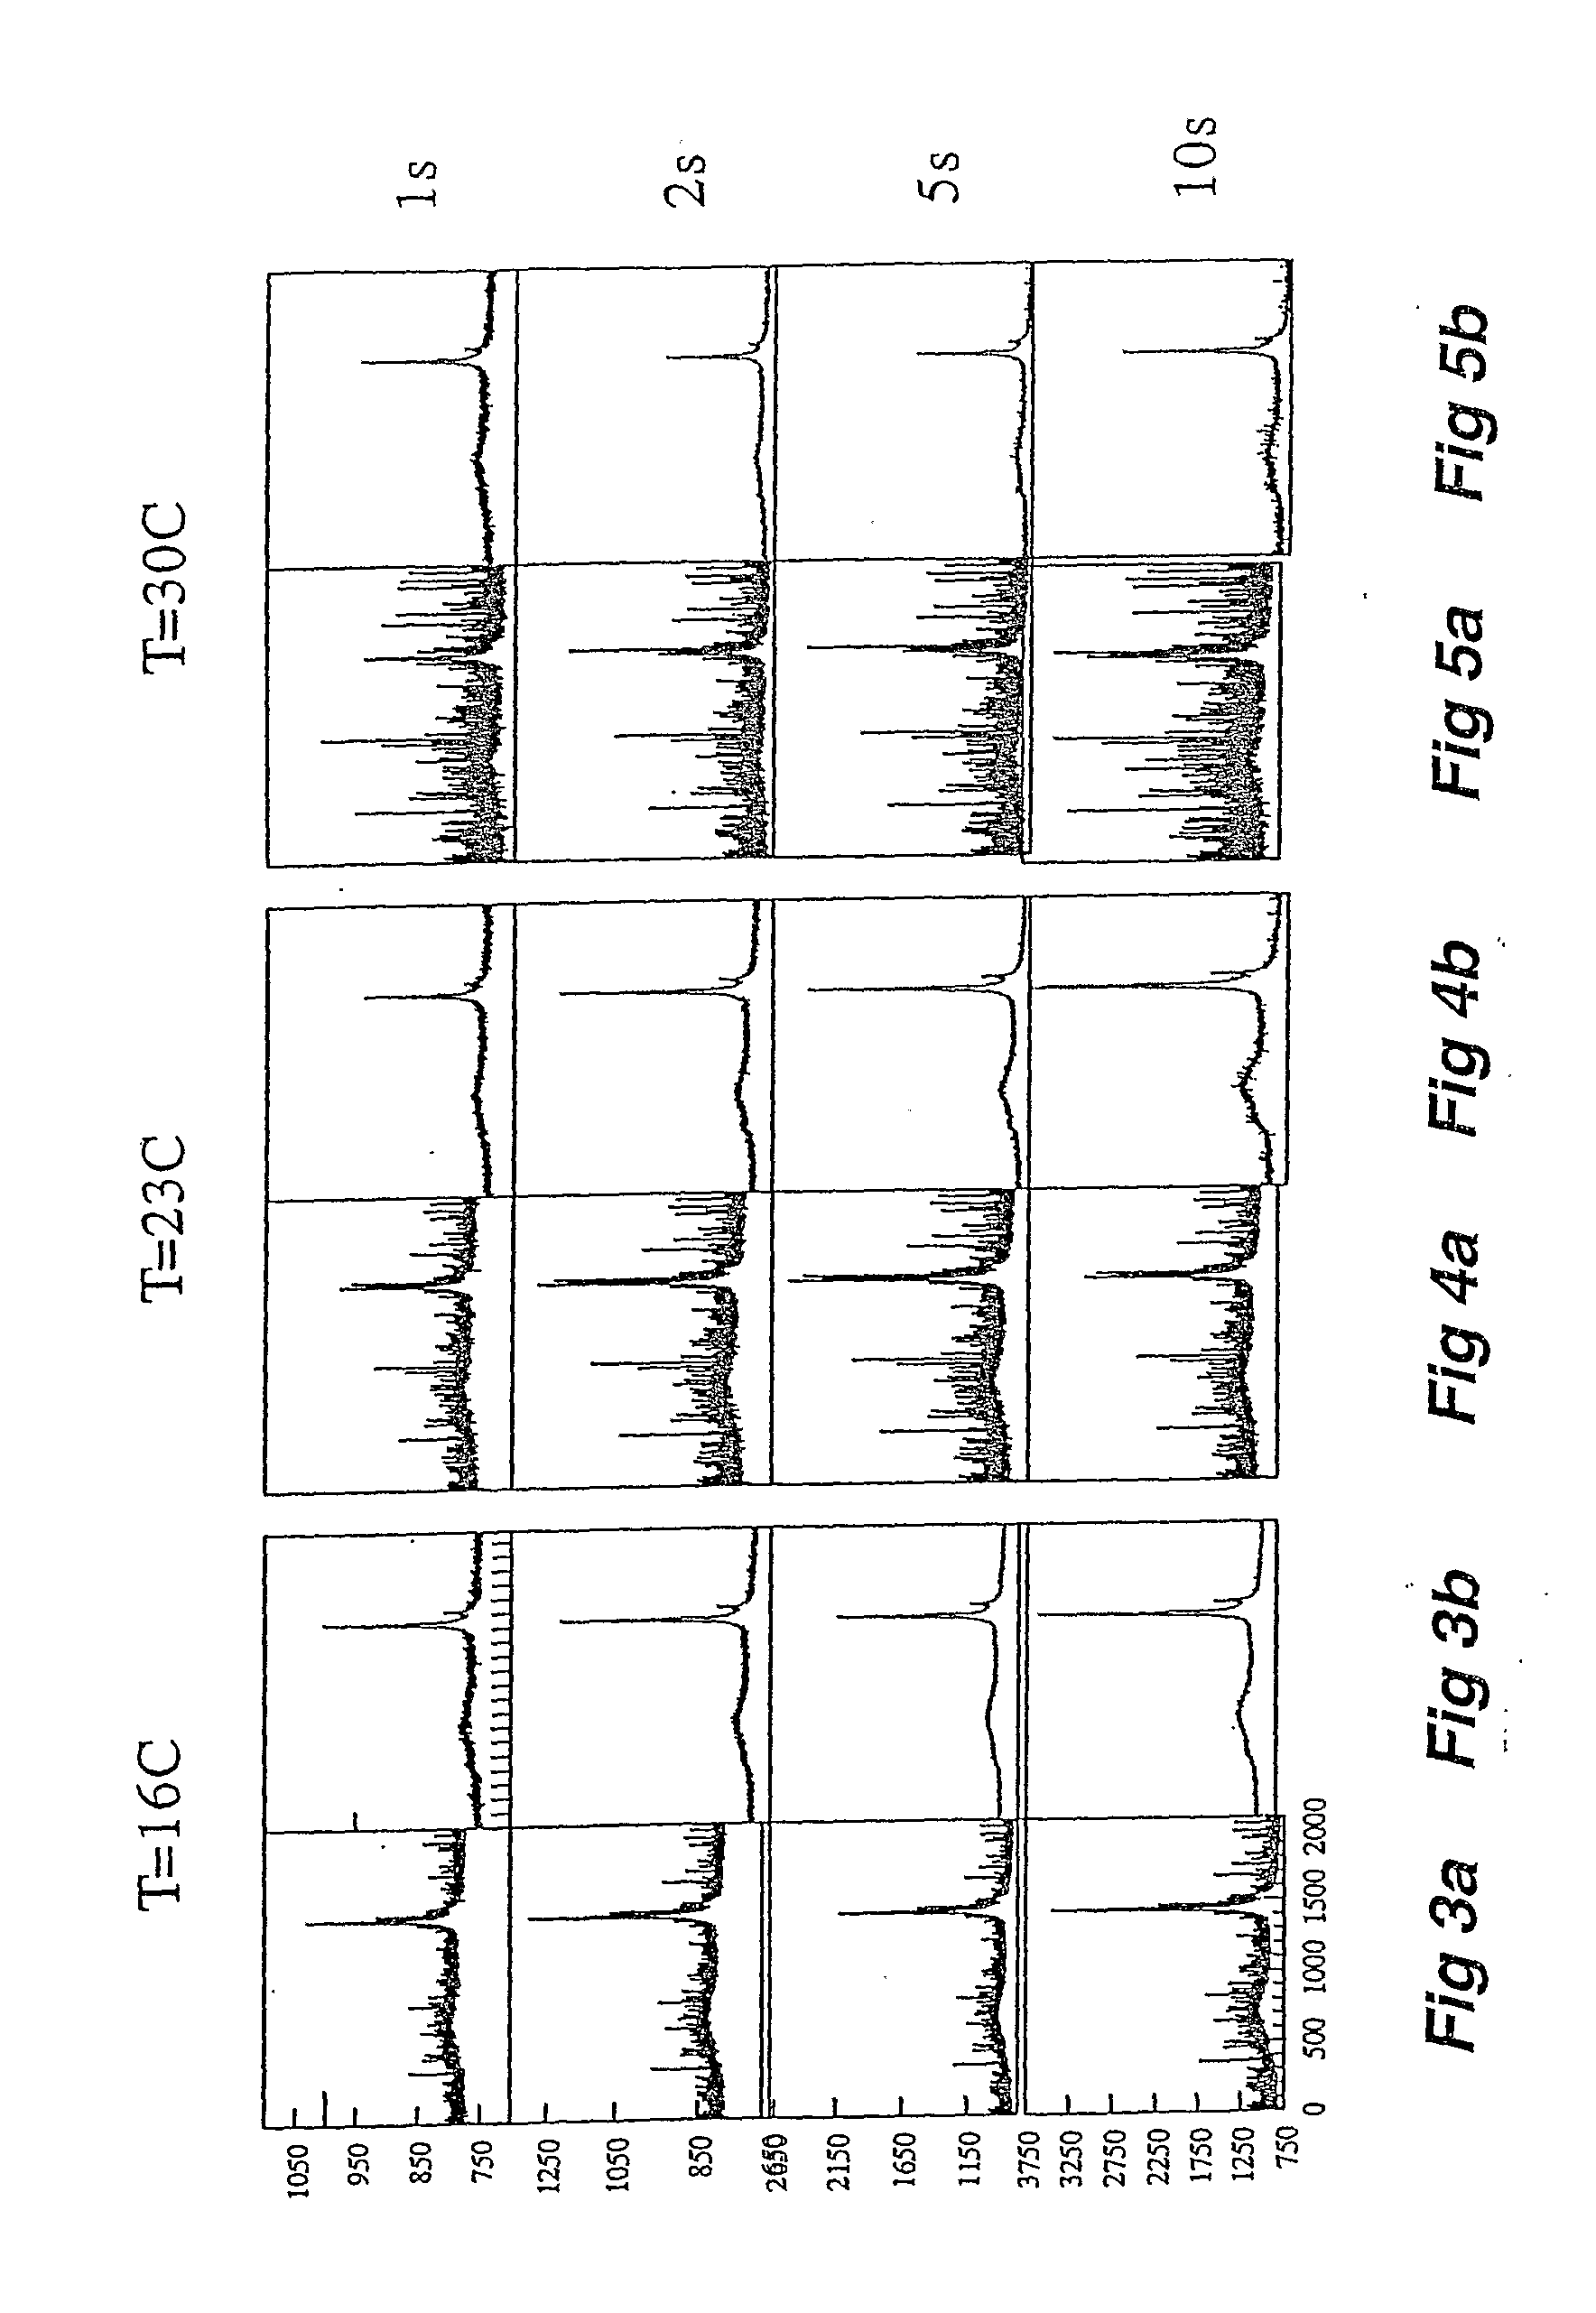 Method for Producing High Signal to Noise Spectral Measurements in Optical Dectector Arrays